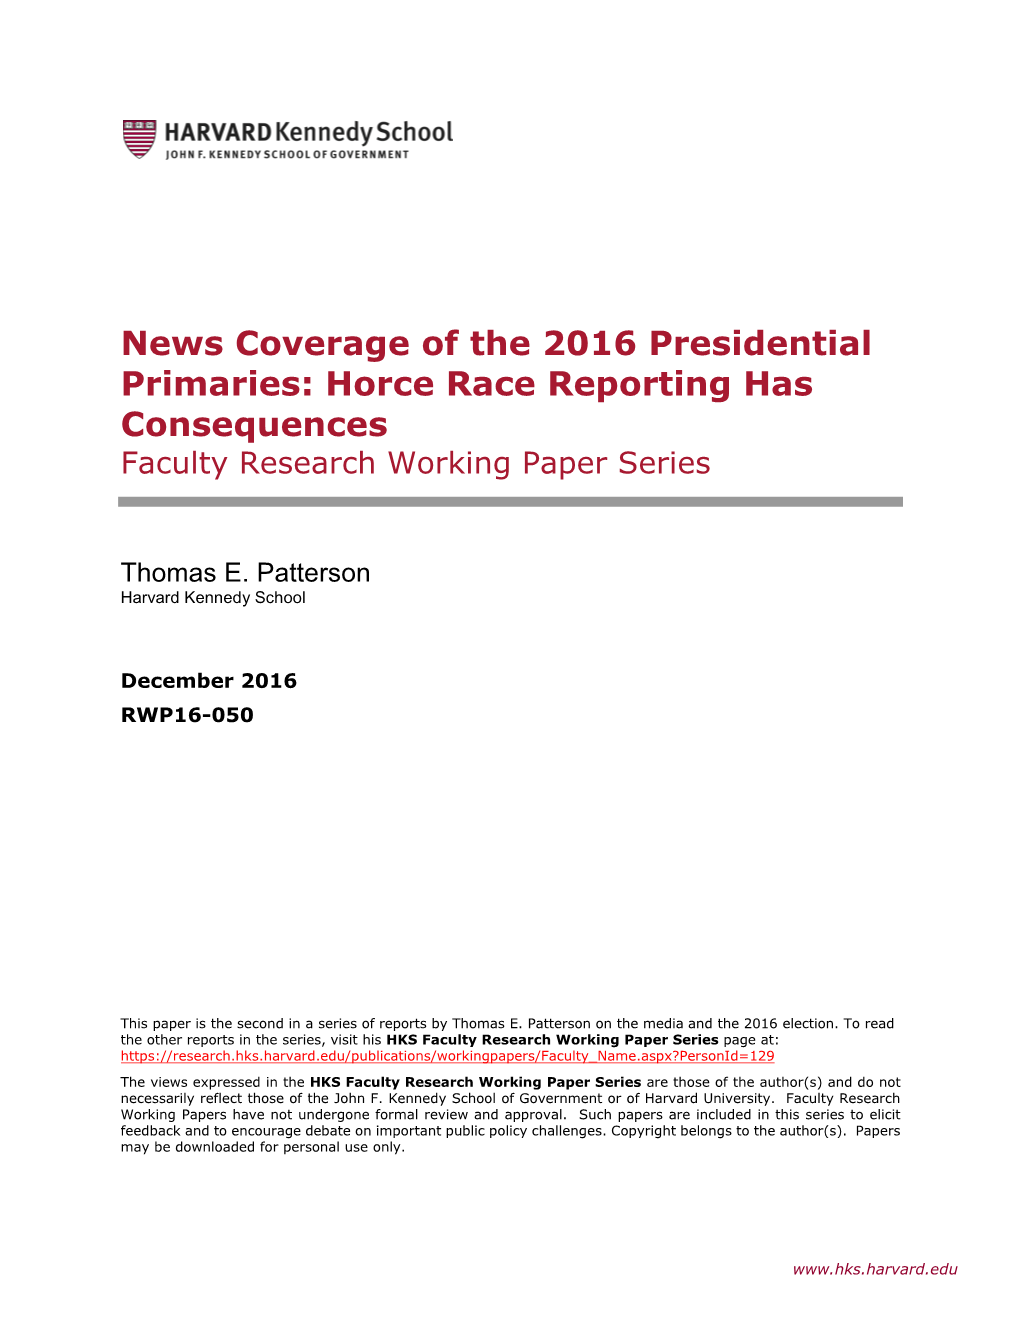 News Coverage of the 2016 Presidential Primaries: Horce Race Reporting Has Consequences Faculty Research Working Paper Series